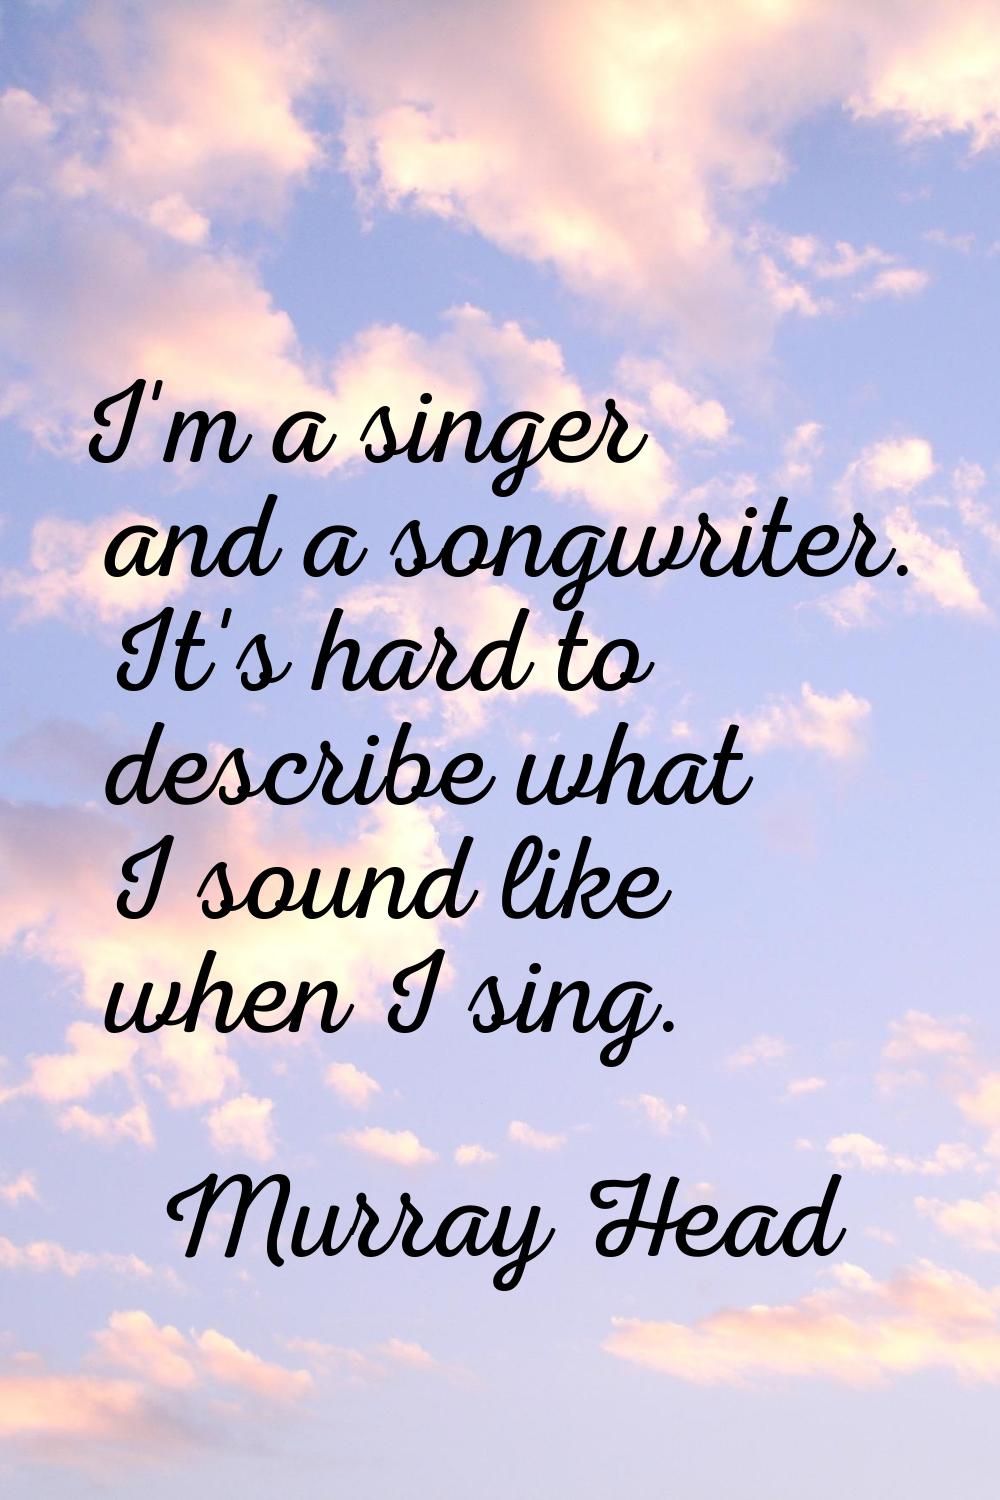 I'm a singer and a songwriter. It's hard to describe what I sound like when I sing.